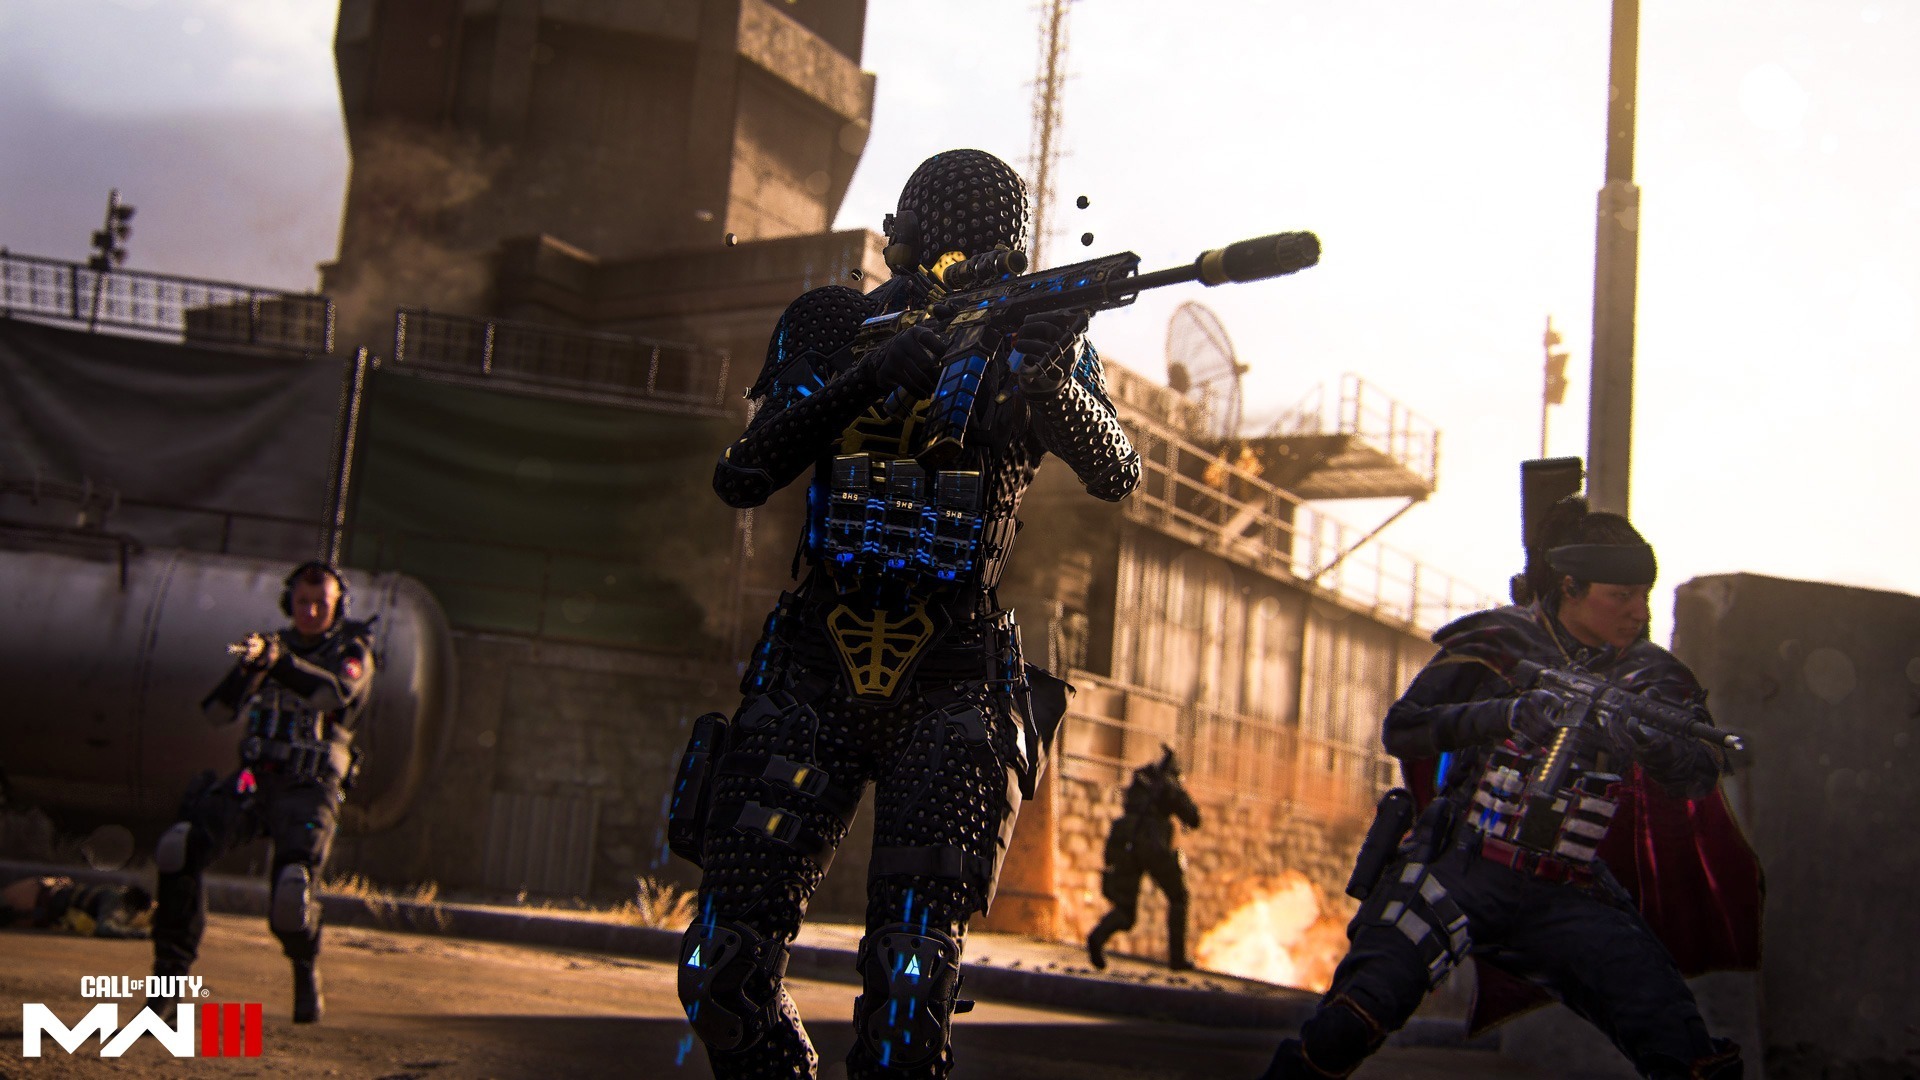 MW3 And Warzone Season 3 Reloaded Roadmap And Patch Notes: Release Date, Battle Pass, Zombies, Weapons, Content, Bundles And Everything You Need To Know